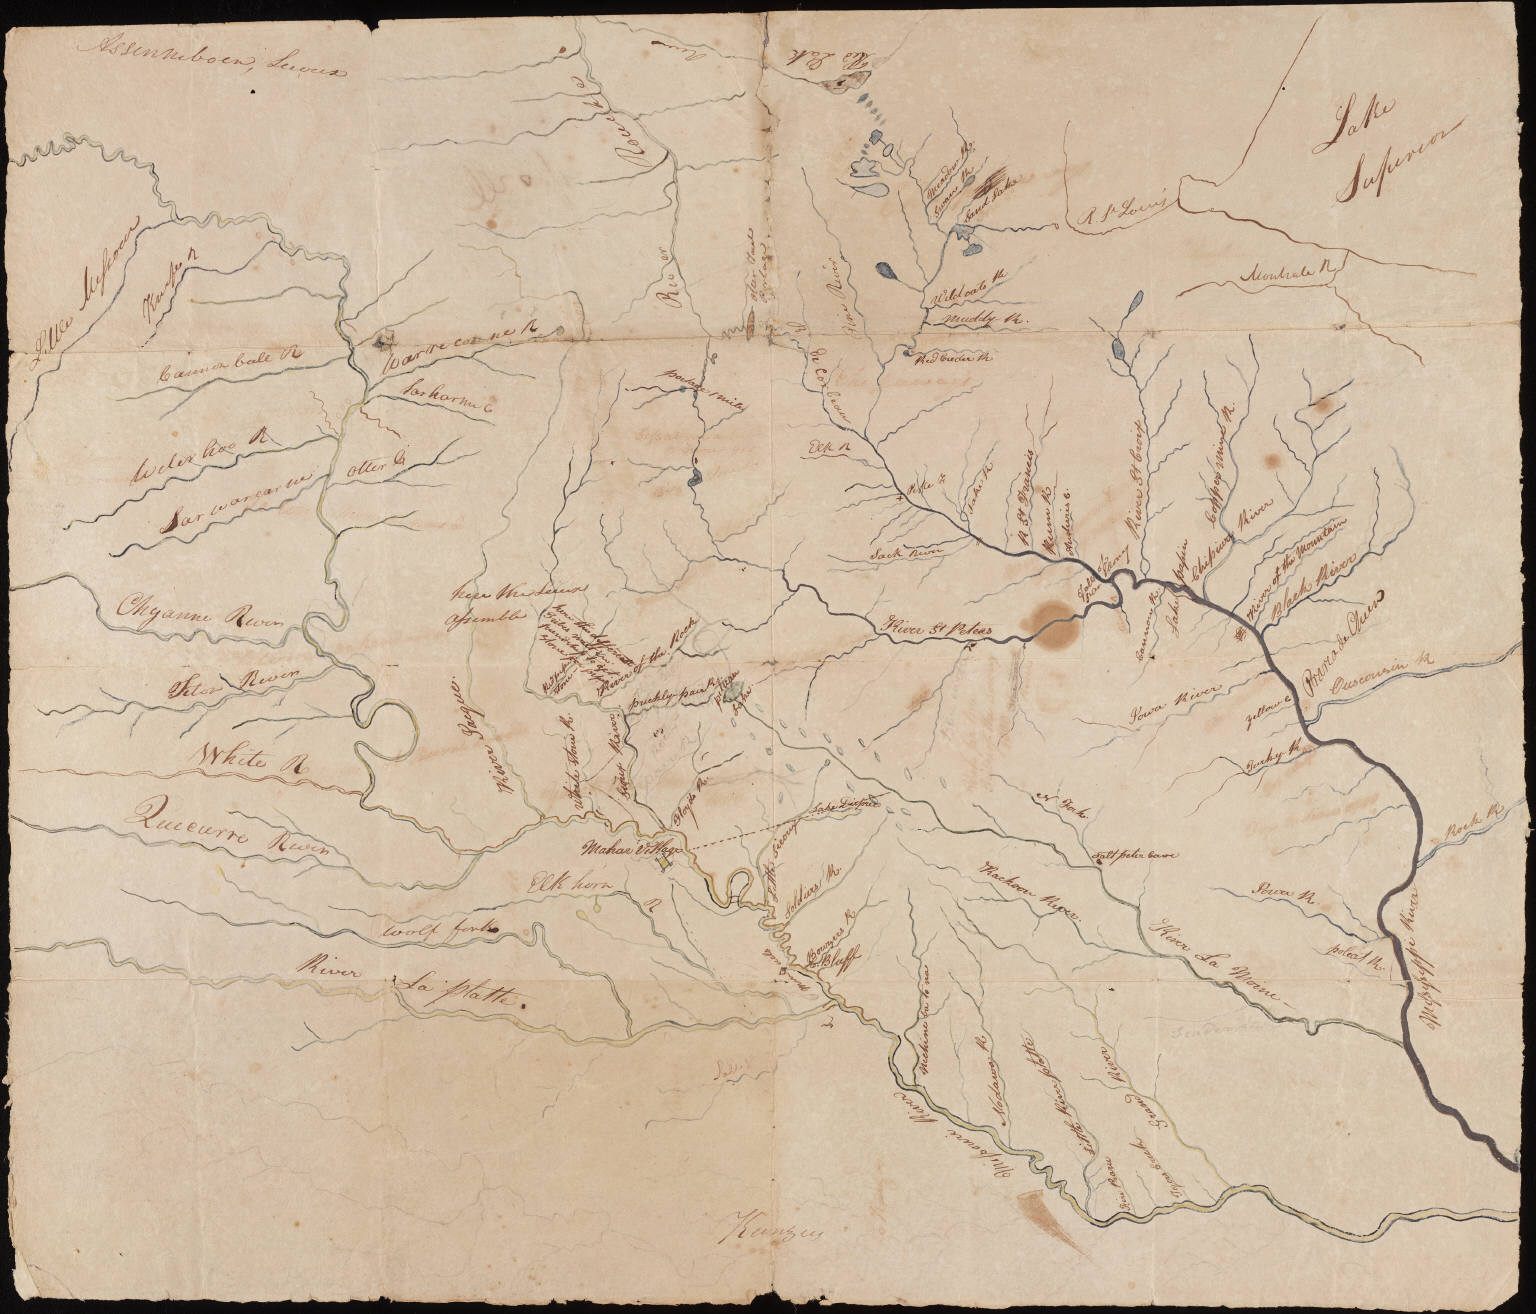 A map from the Lewis and Clark Expedition (Courtesy of Yale University Library via Wikimedia Commons).